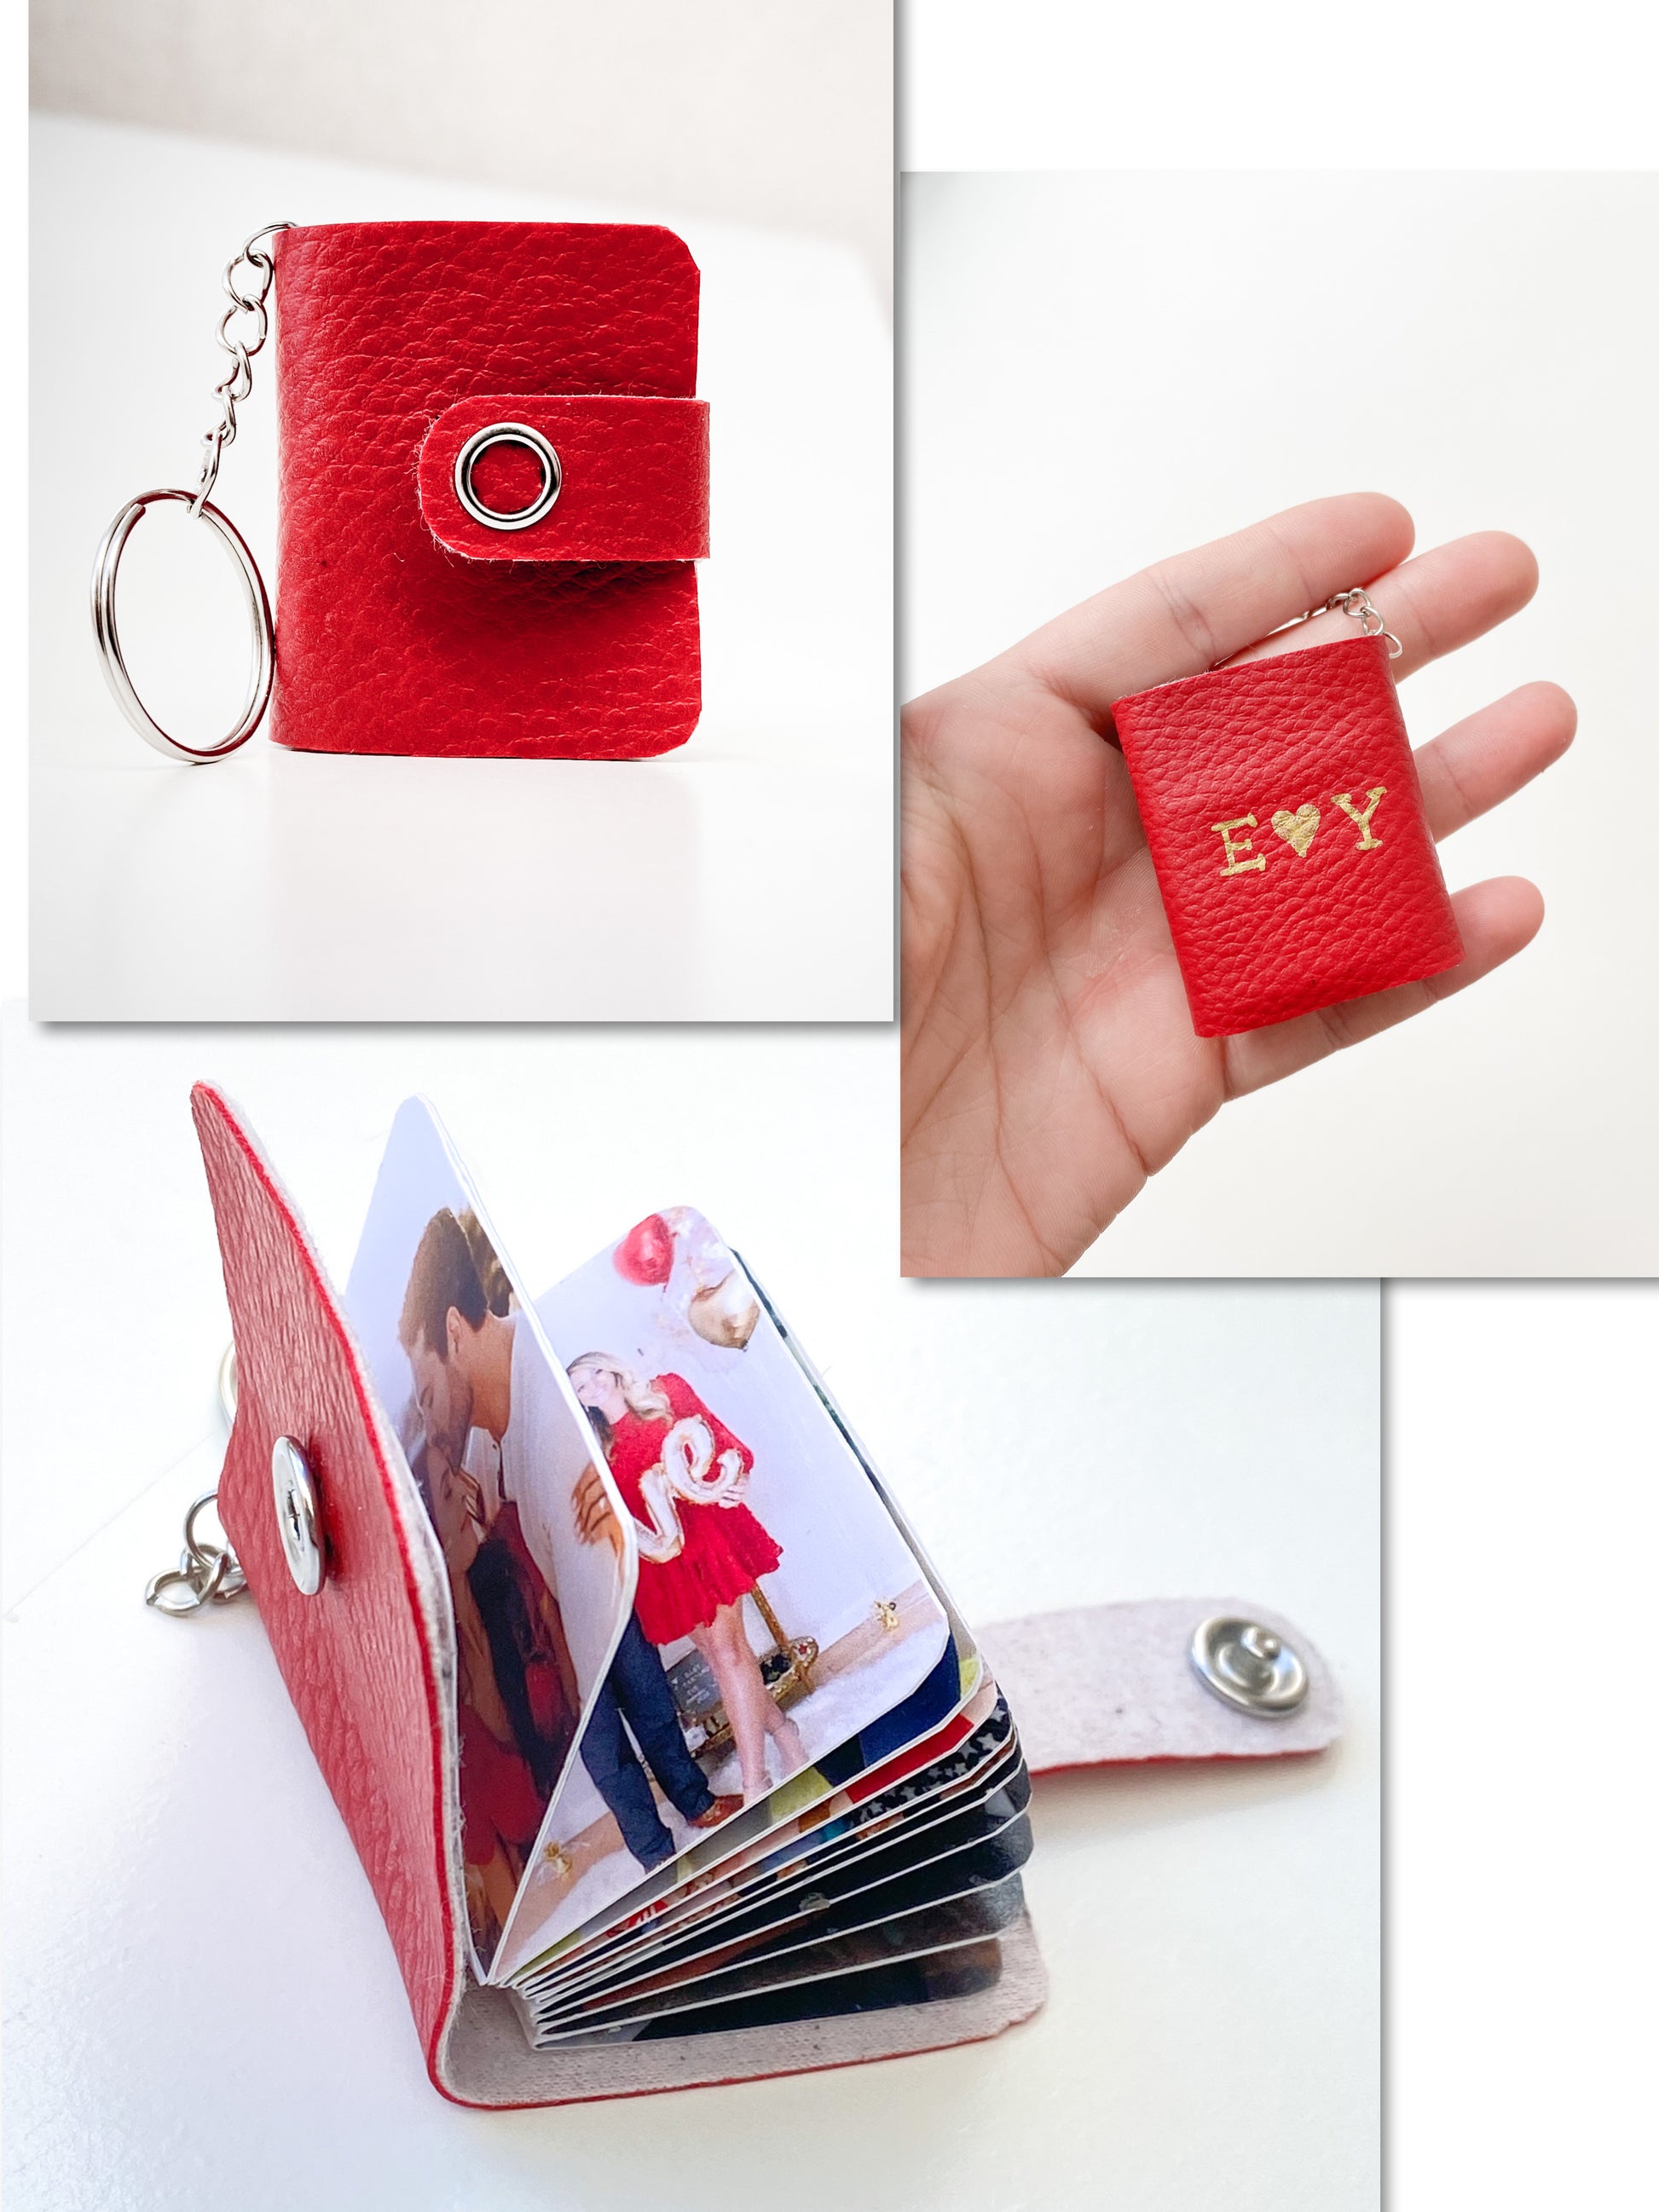 Mini Book Photo Album Leather Keychain - Personalized Gifts for